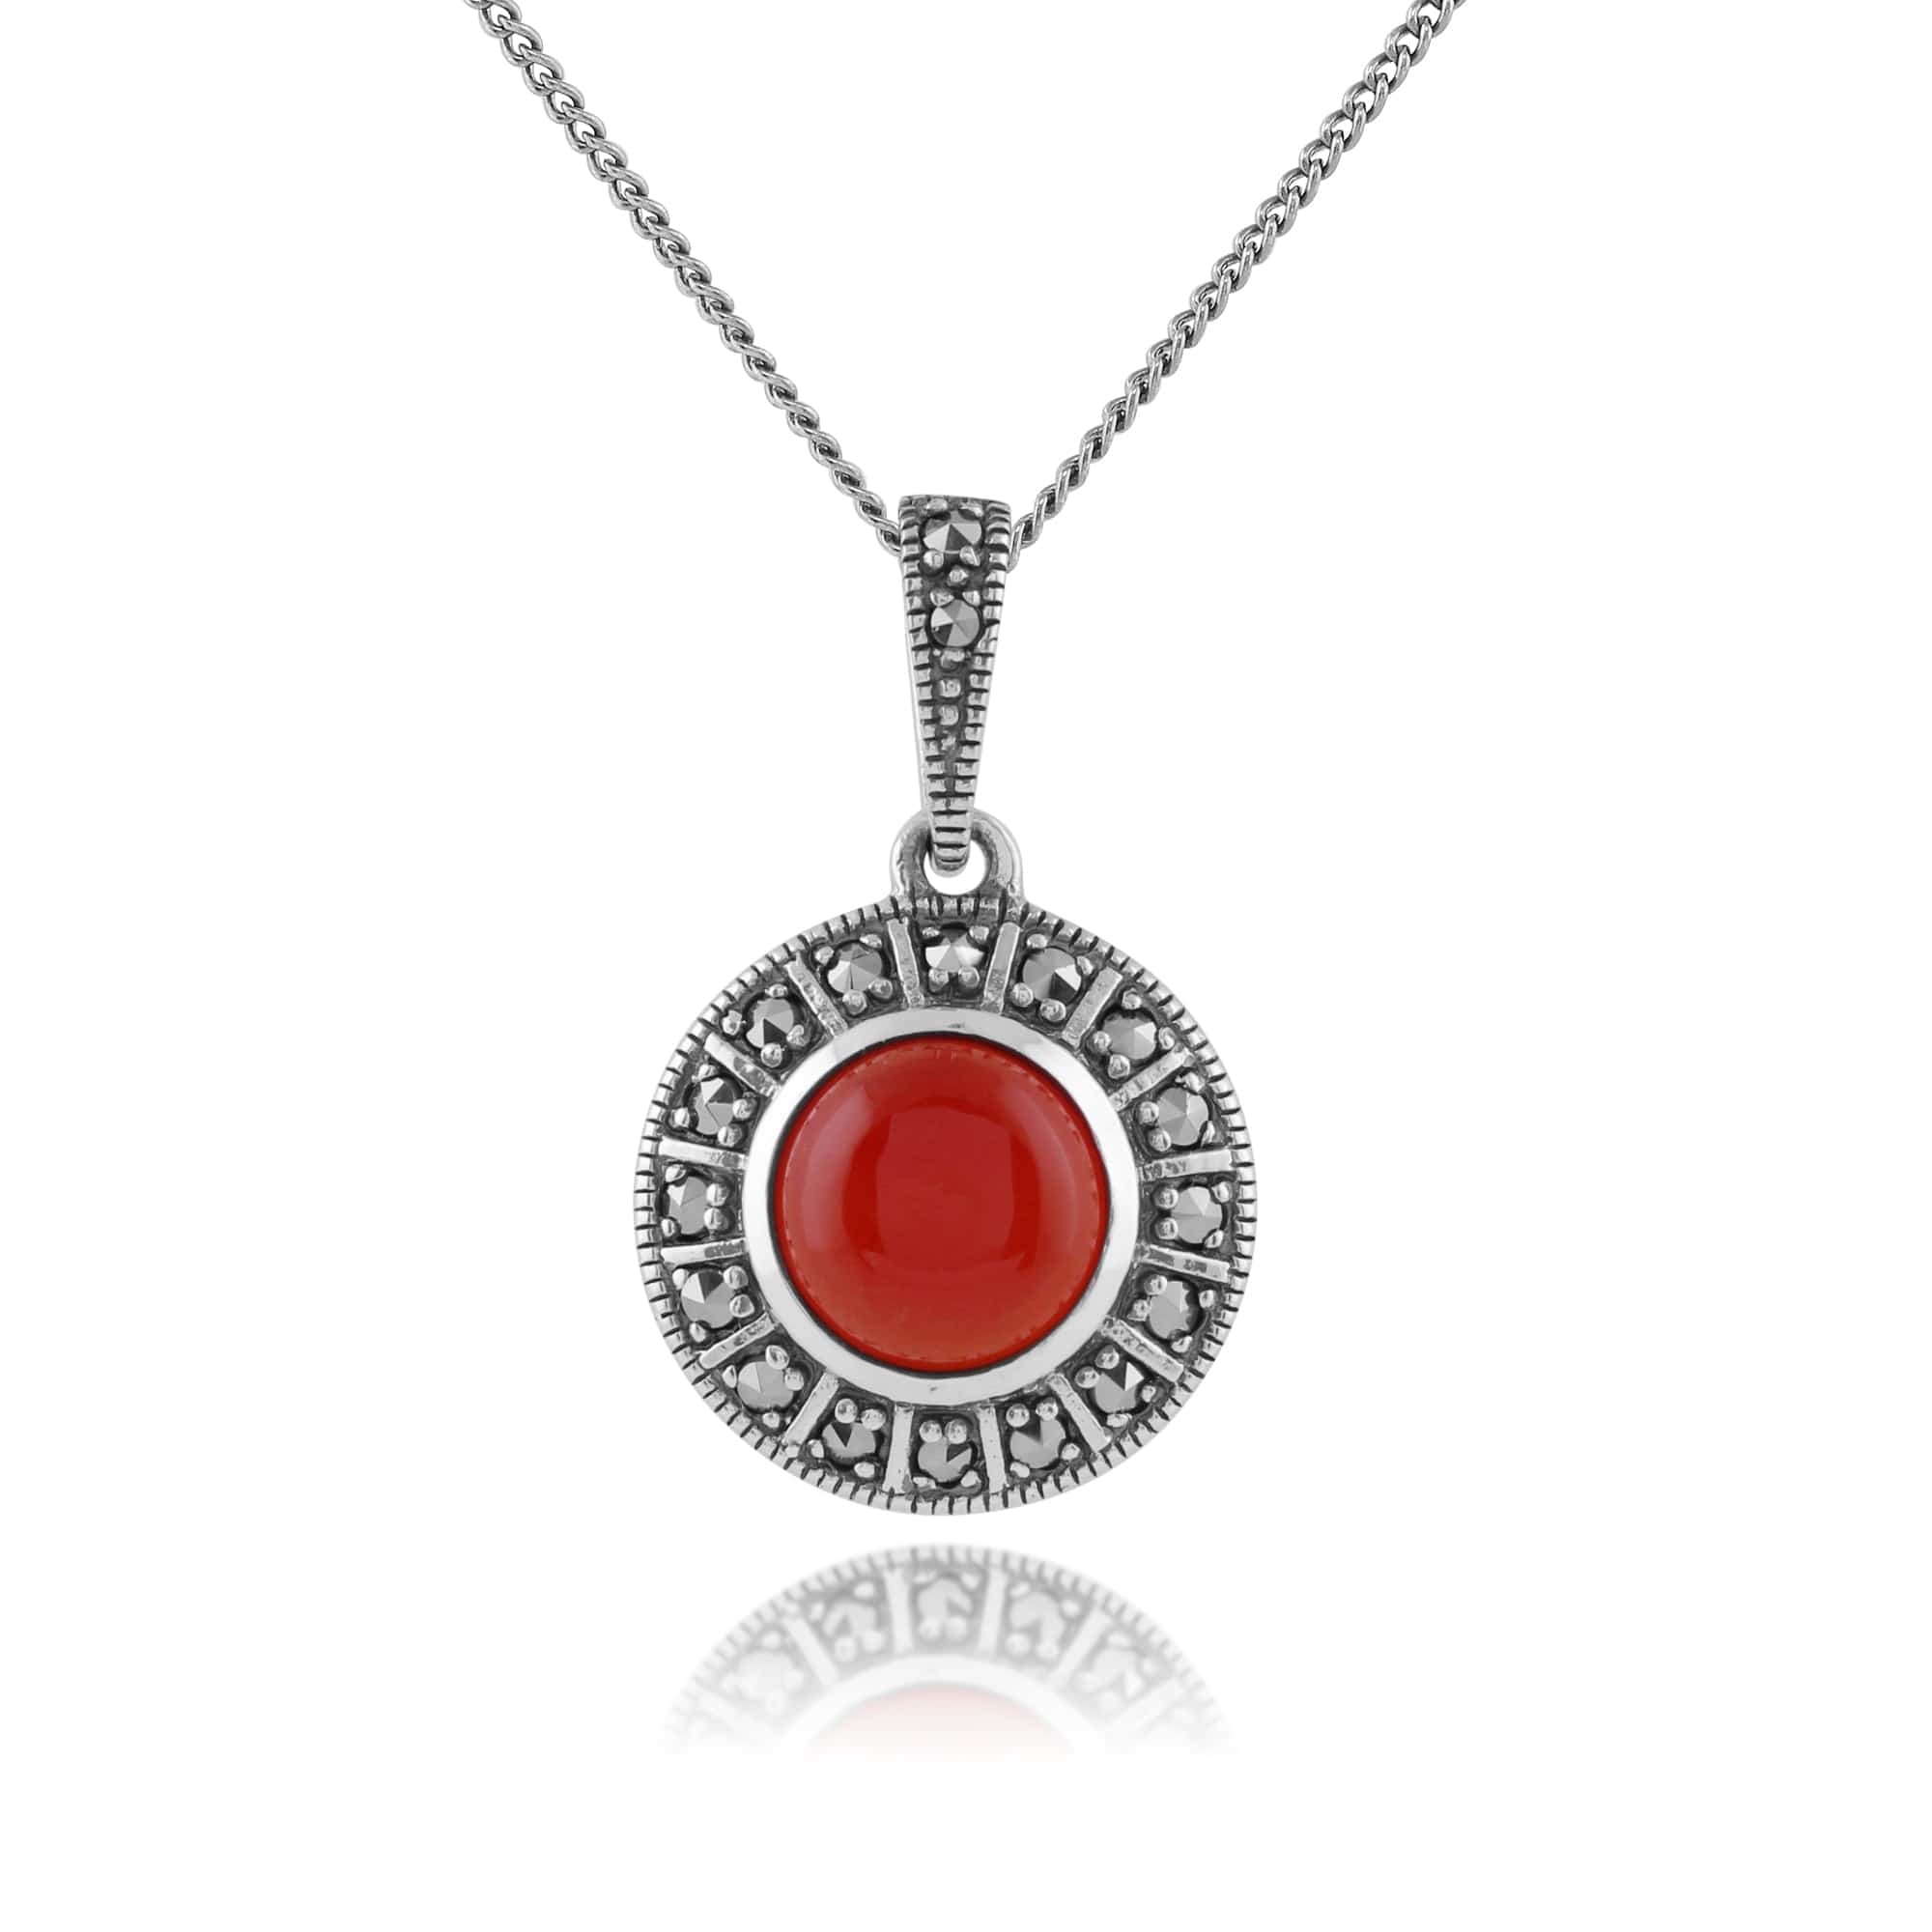 Art Deco Style Round Carnelian Cabochon & Marcasite Pendant in 925 Sterling Silver